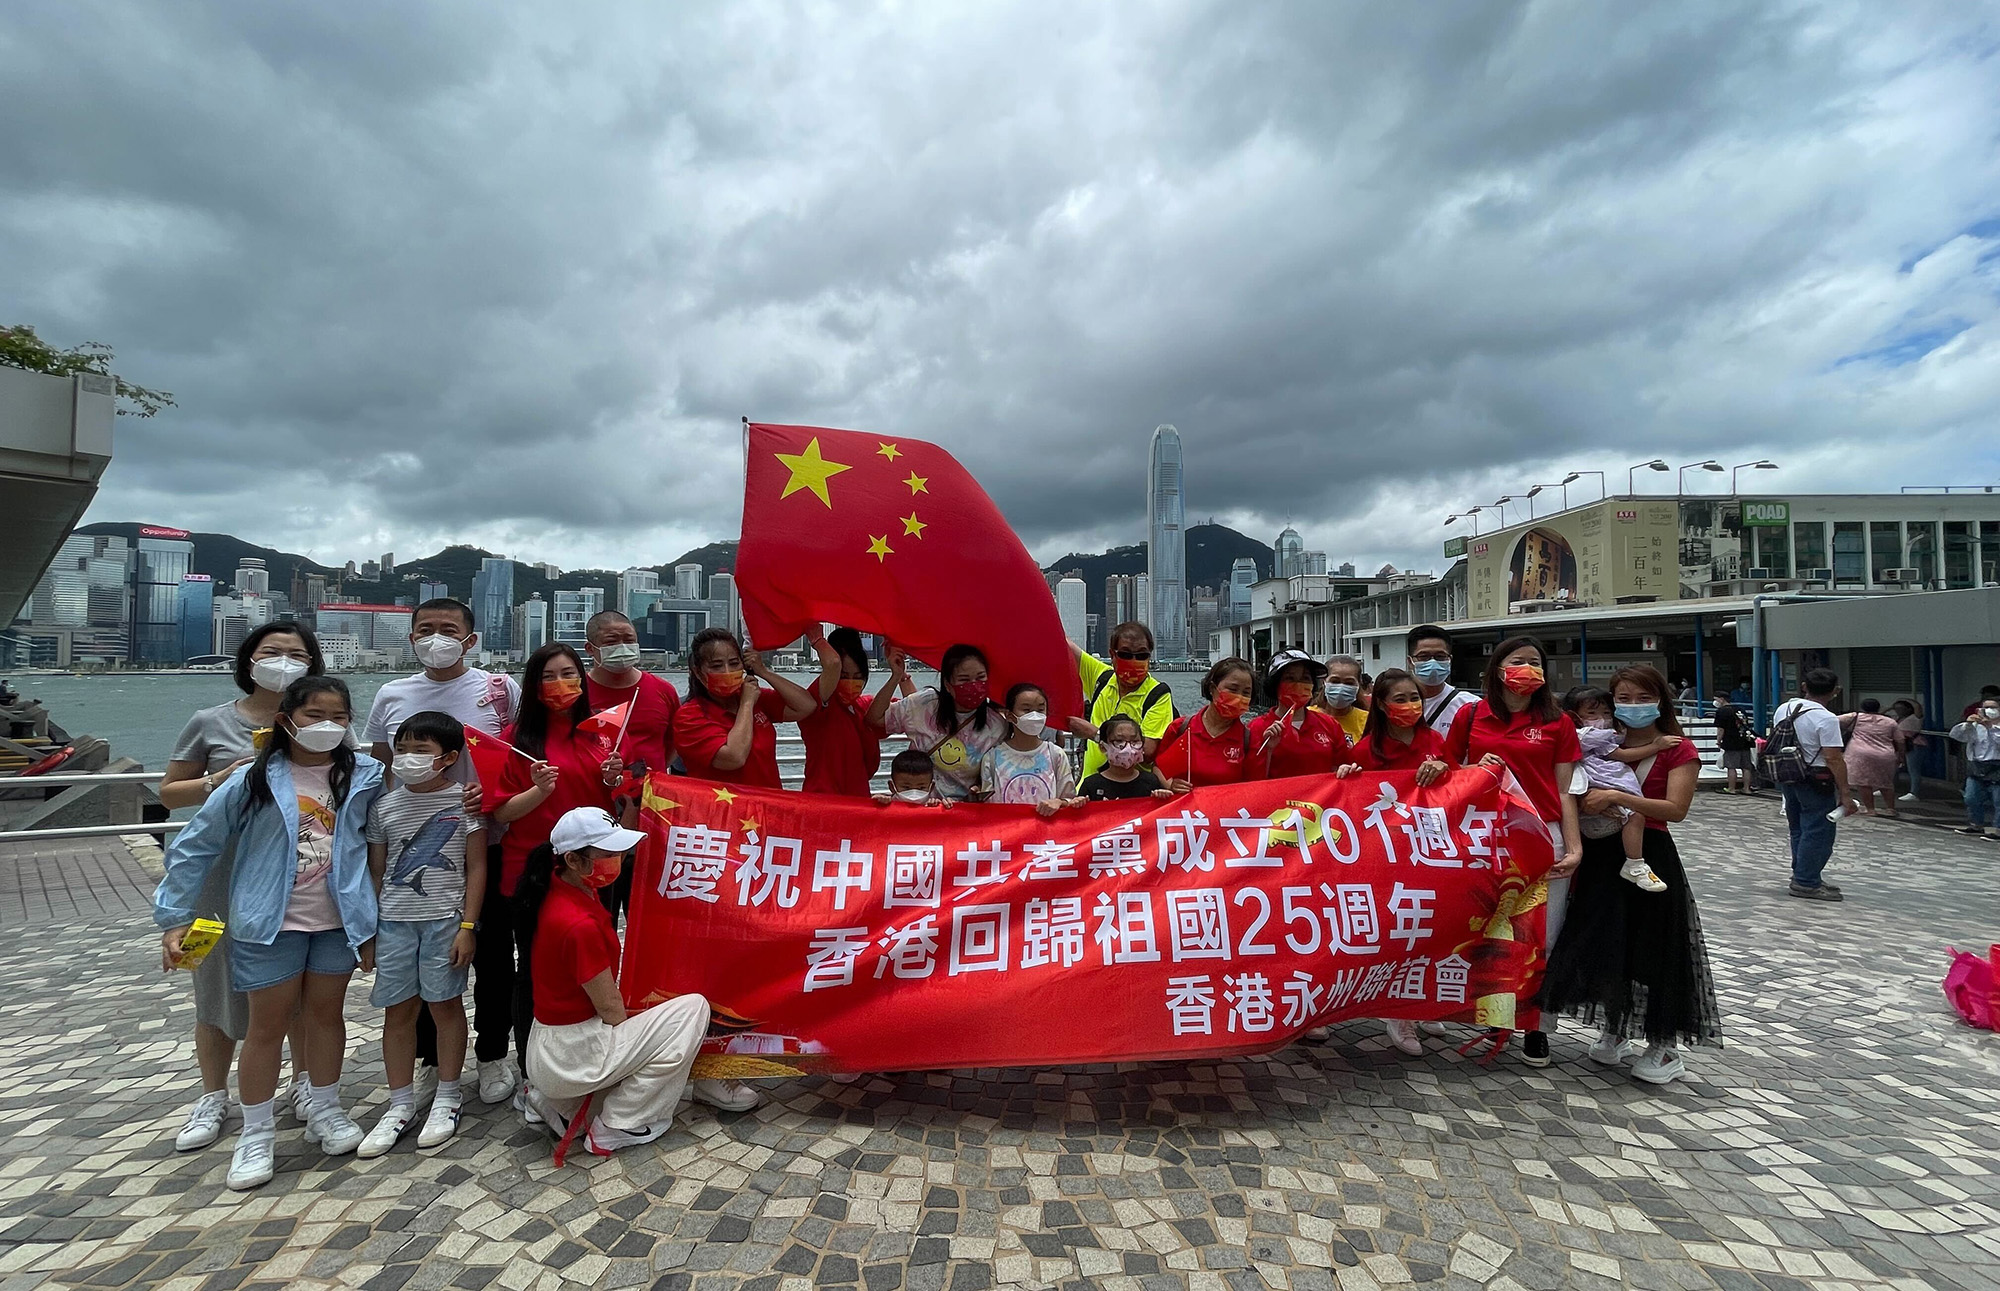 A group of about 30 people gathered to hold a Chinese national flag and a patriotic banner with the message "Celebrating the 101st year of the establishment of the Chinese Communist Party and the 25th handover anniversary of Hong Kong to the Chinese motherland, from the Hong Kong Hunan Fraternity Association," on July 1.